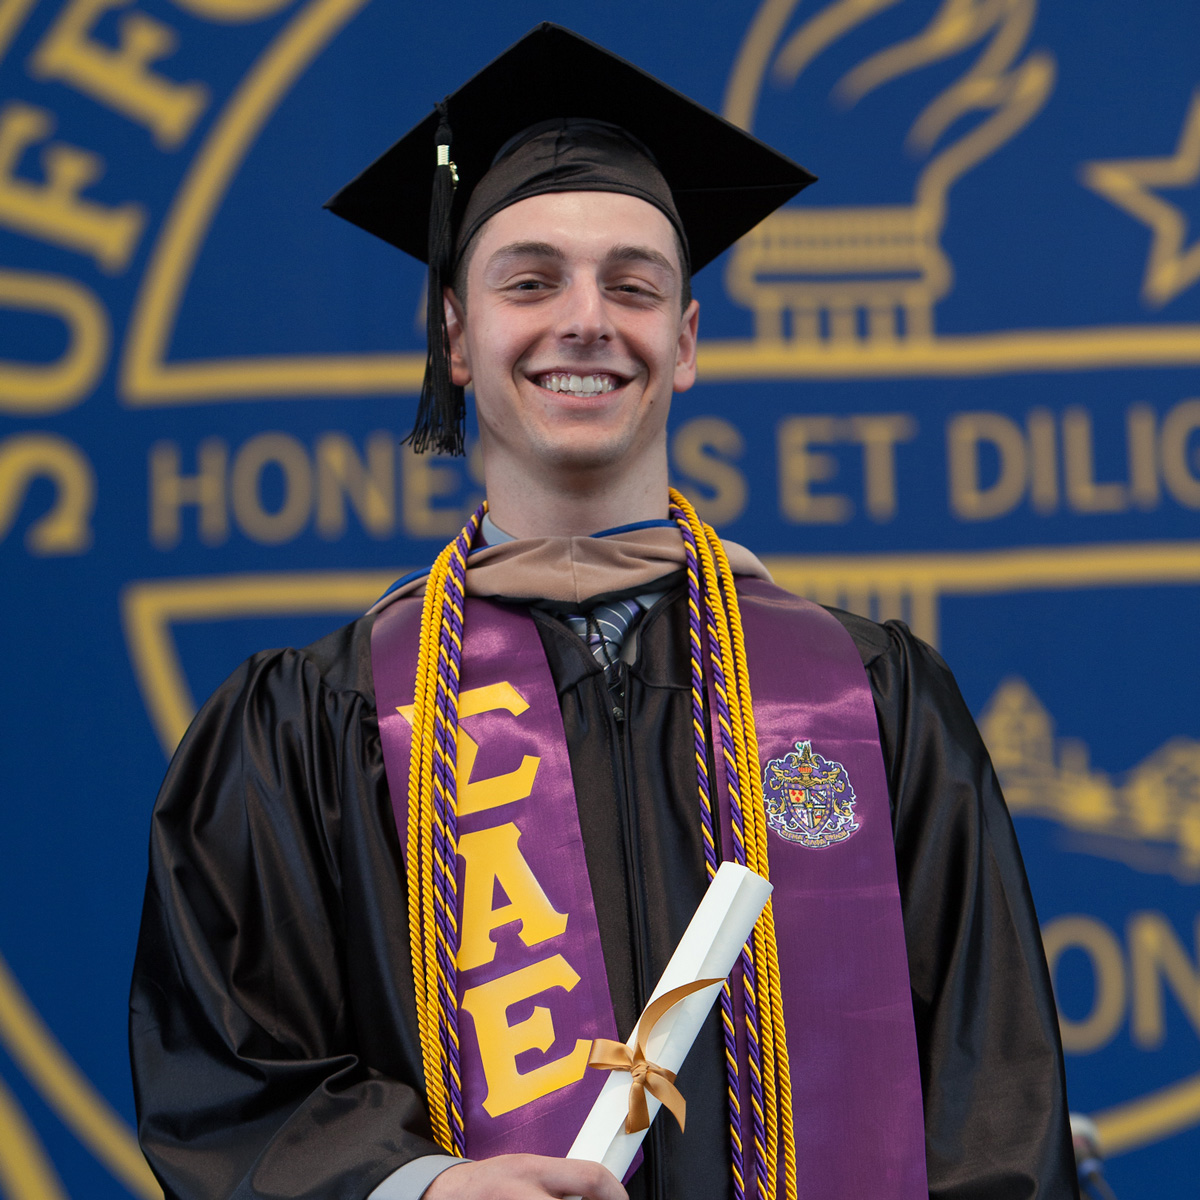 Dan holding up his scroll and smiling for the camera wearing his cap and gown while crossing the stage at Commencement.